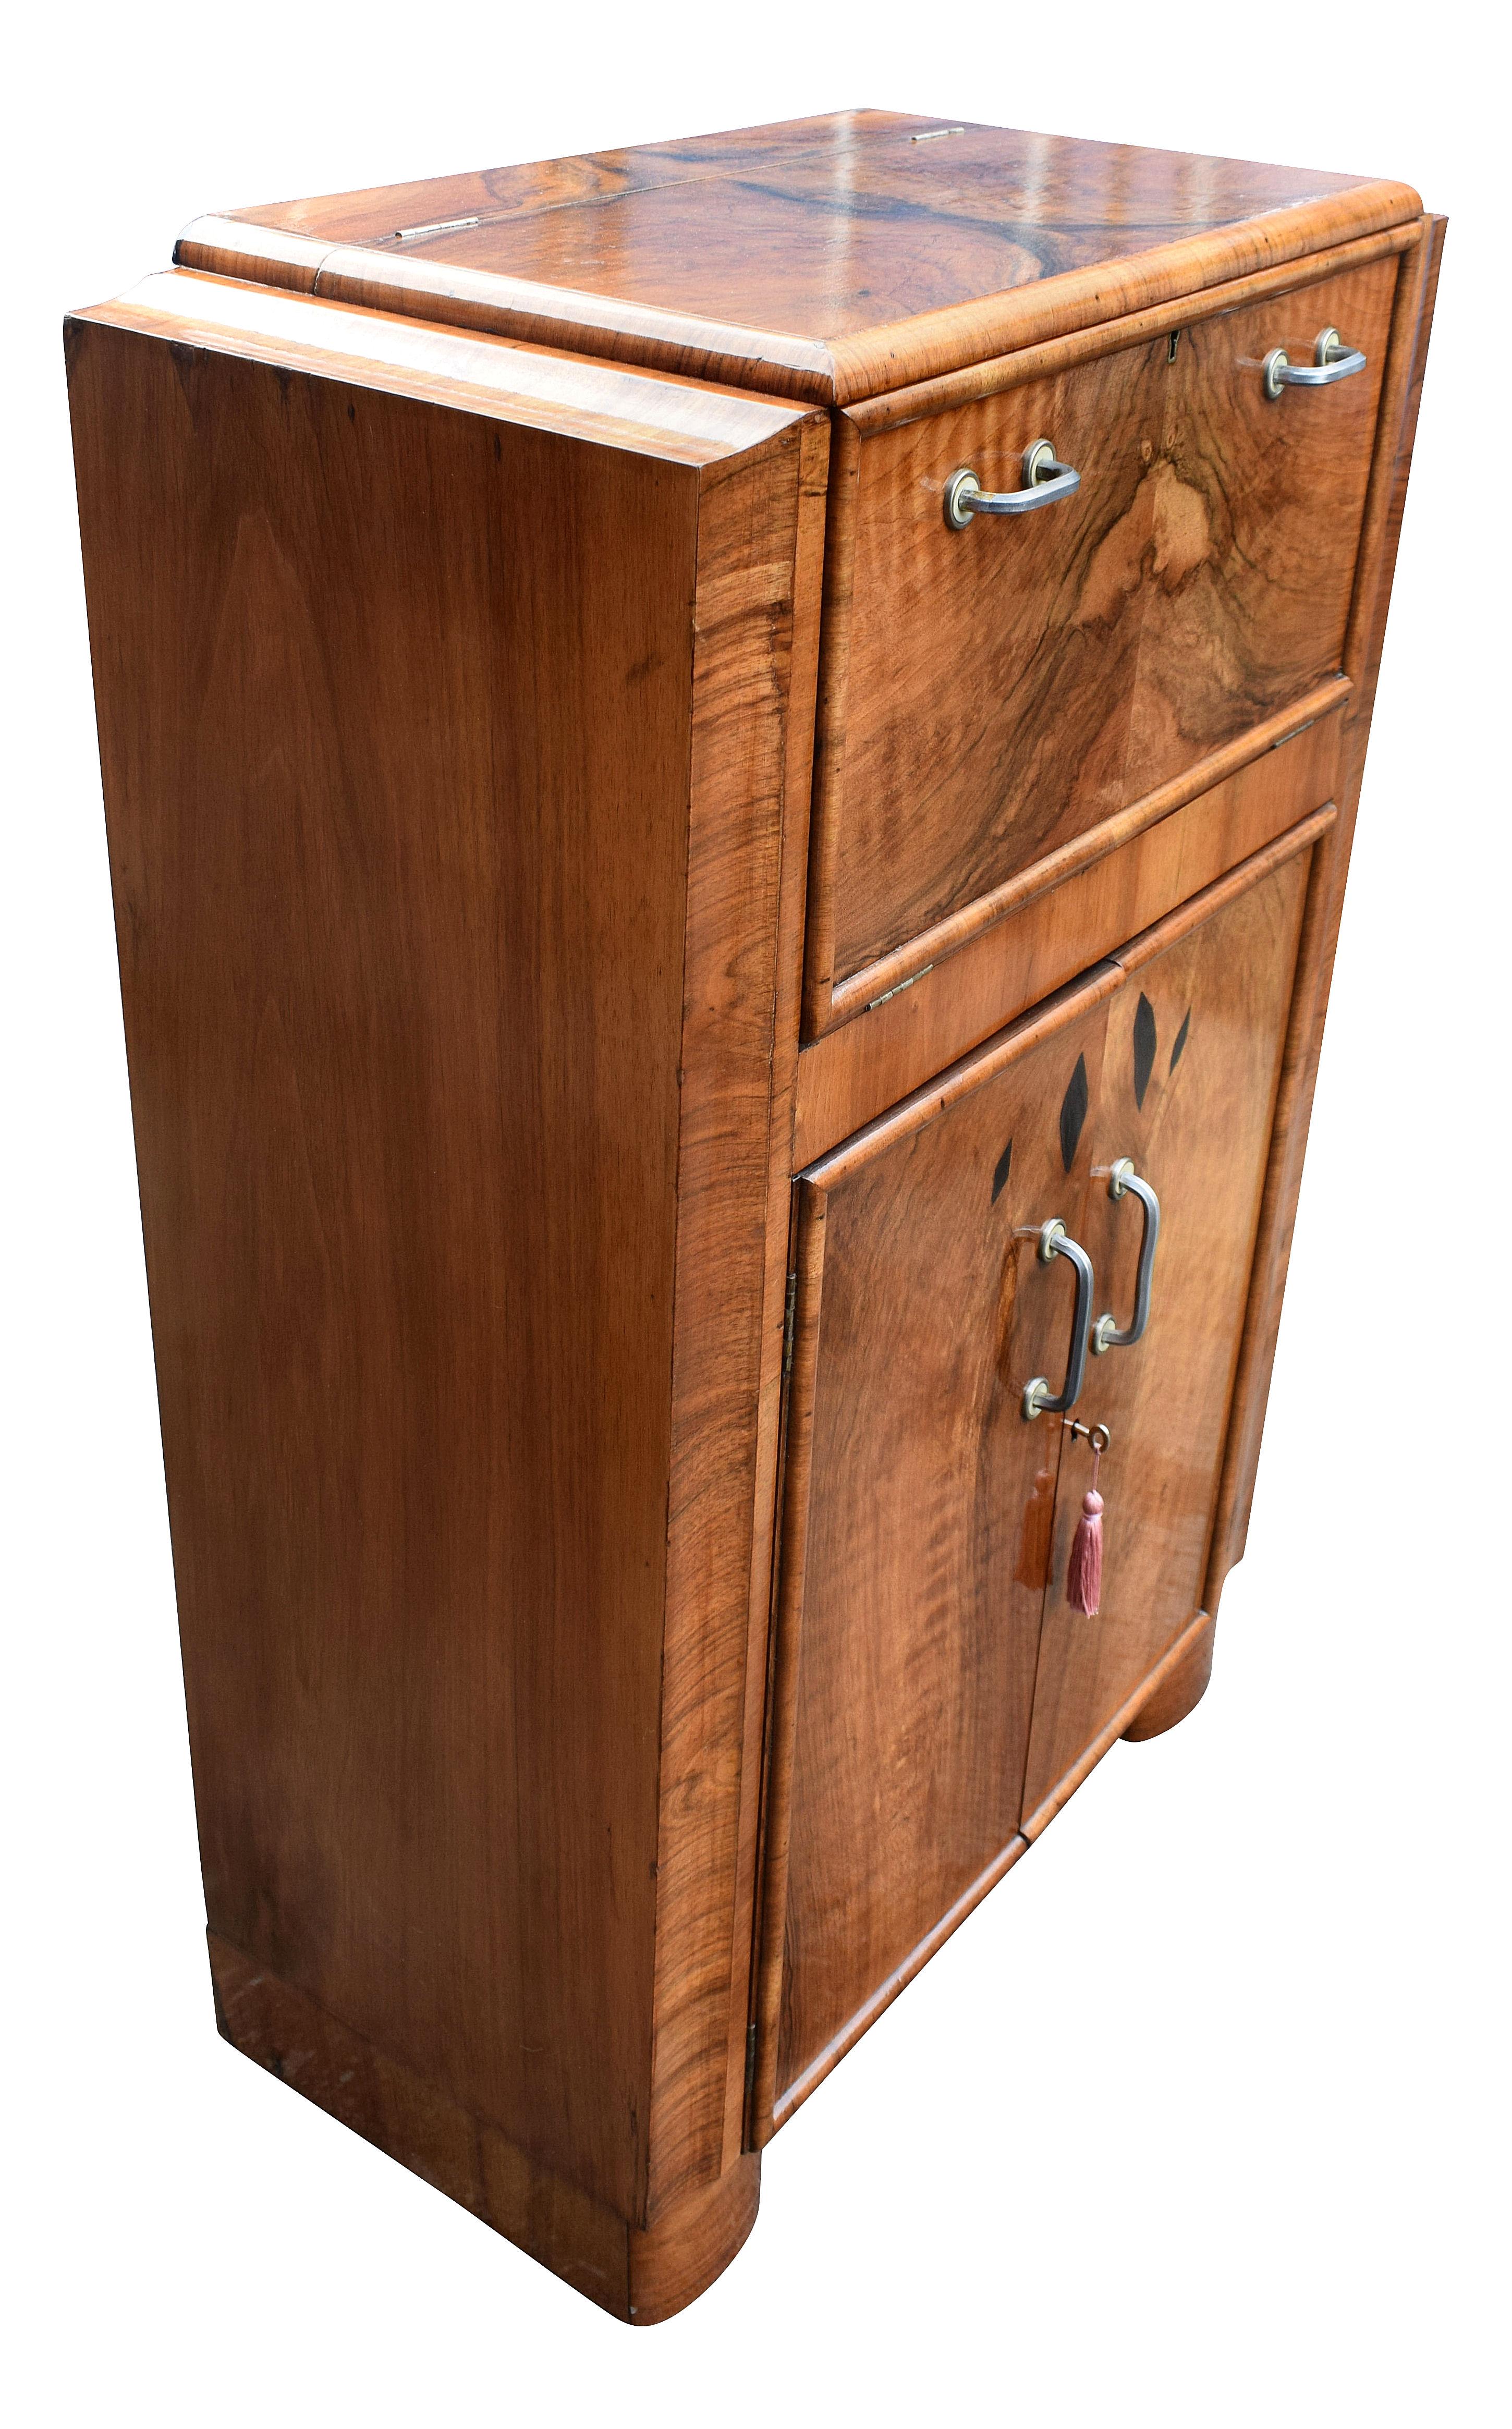 Beautiful 1930s Art Deco walnut upright cocktail cabinet, every Deco interior should have one of these ! Features a drop down top which reveals a mirrored interior and storage for bottles and glasses. A generously sized cupboard below offers plenty